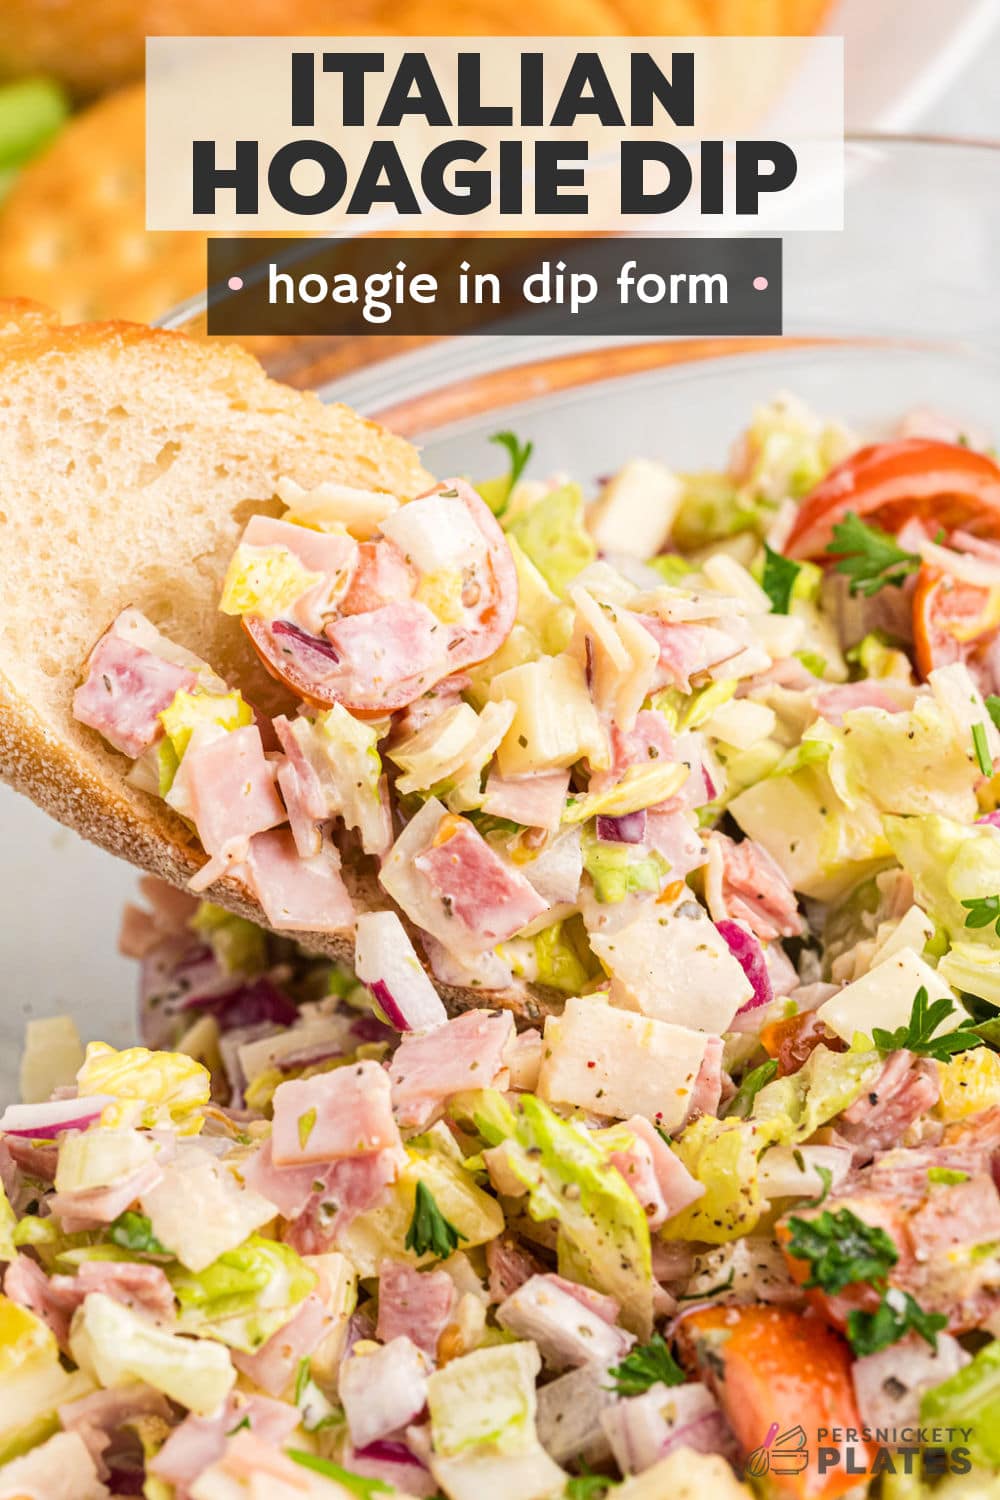 This easy Hoagie Dip takes everything you love about an authentic Italian hoagie and turns it into delicious dip form. All the deli meat and cheeses chopped and tossed with a creamy Italian dressing and scooped up with crusty baguette slices. Skip the sub shop and make this at home for a new favorite! | www.persnicketyplates.com